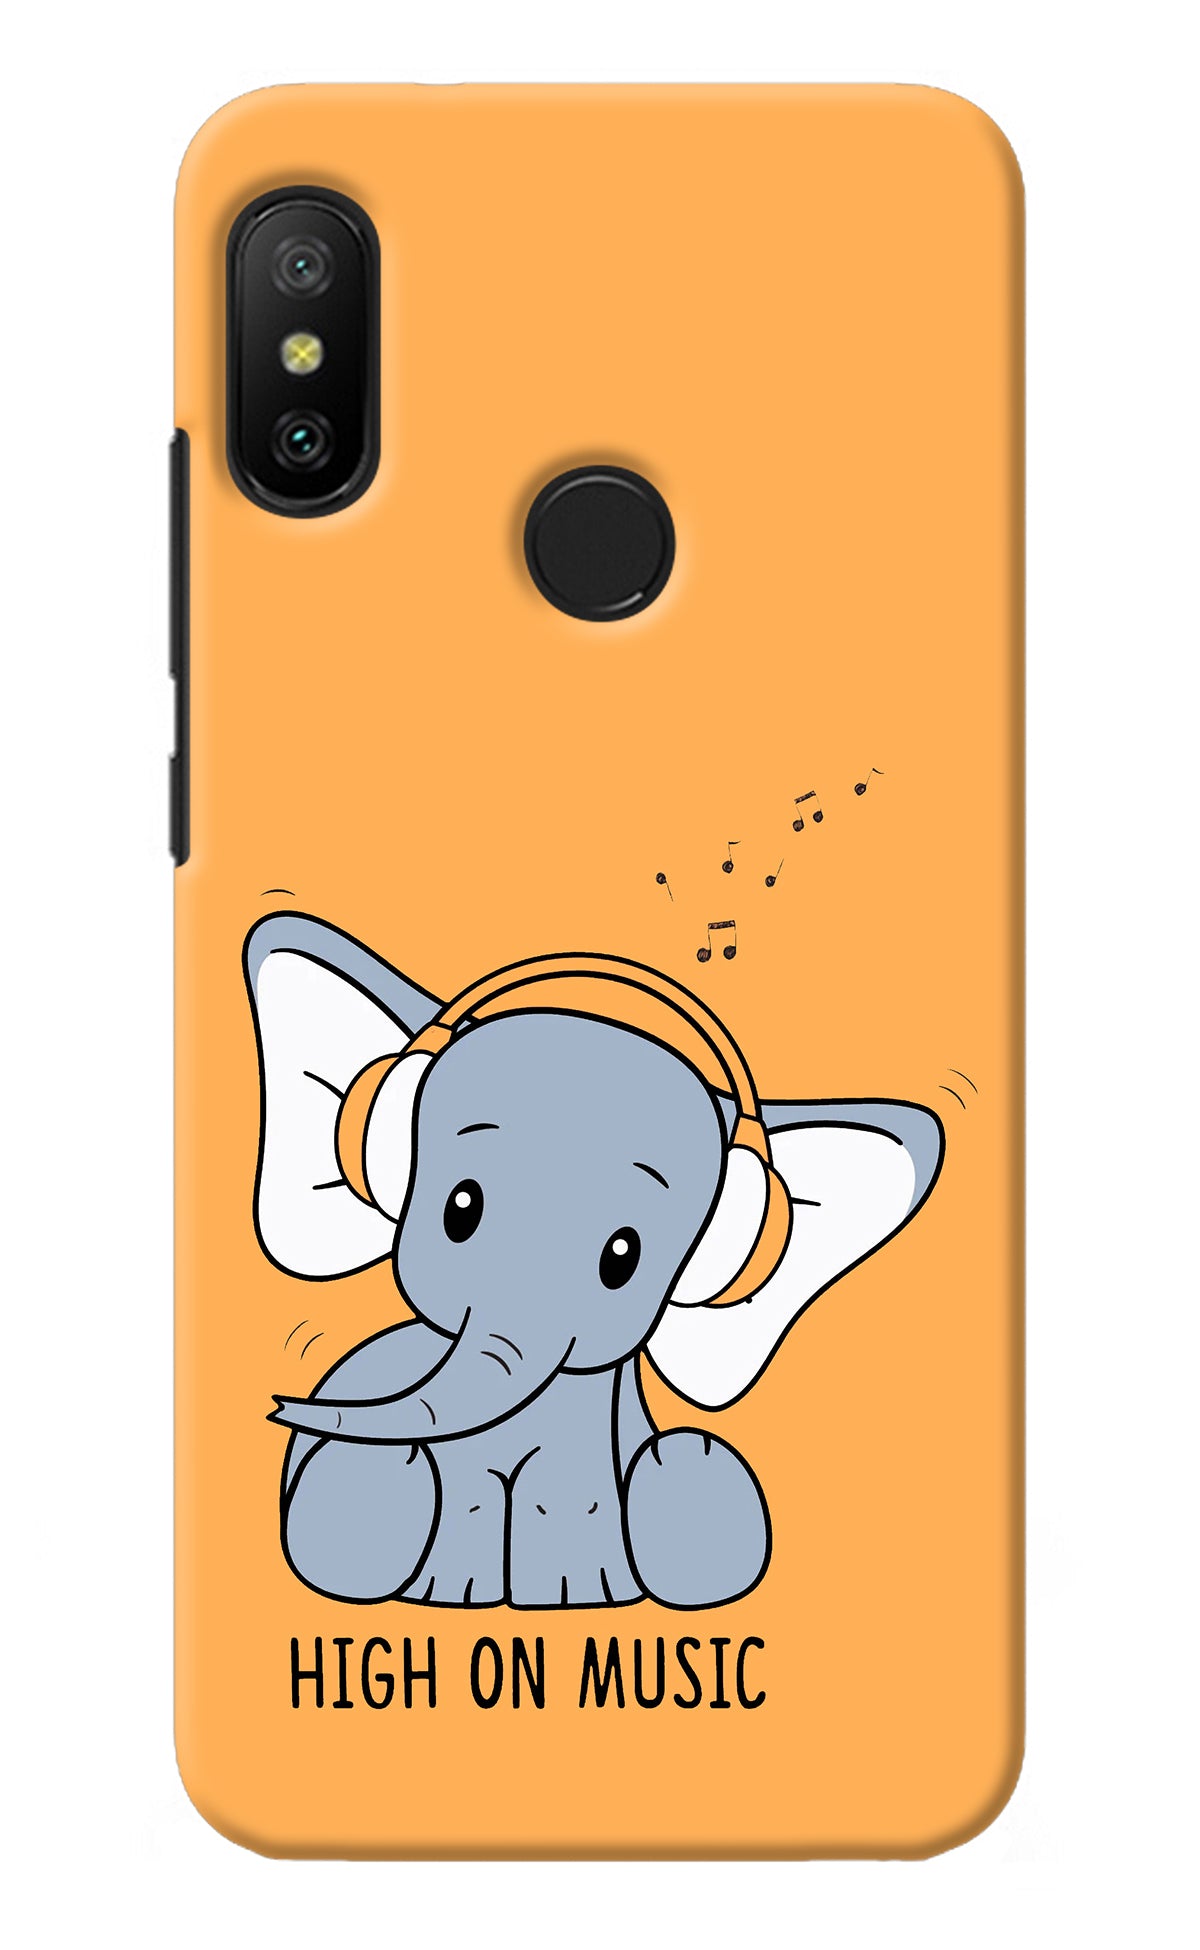 High On Music Redmi 6 Pro Back Cover